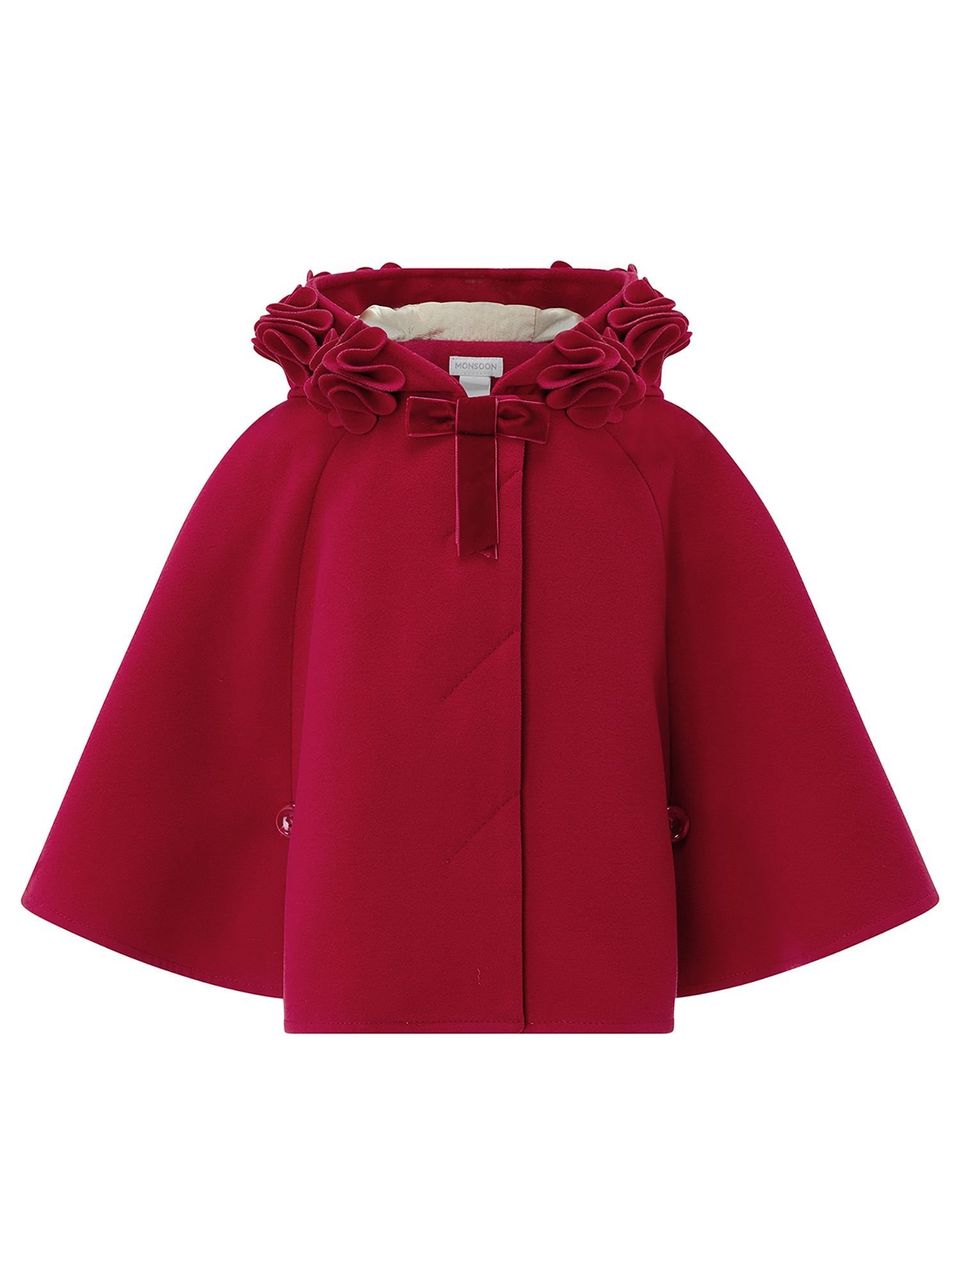 Princess Charlotte Nursery Photos: Where To Get Her Burgundy Coat And ...